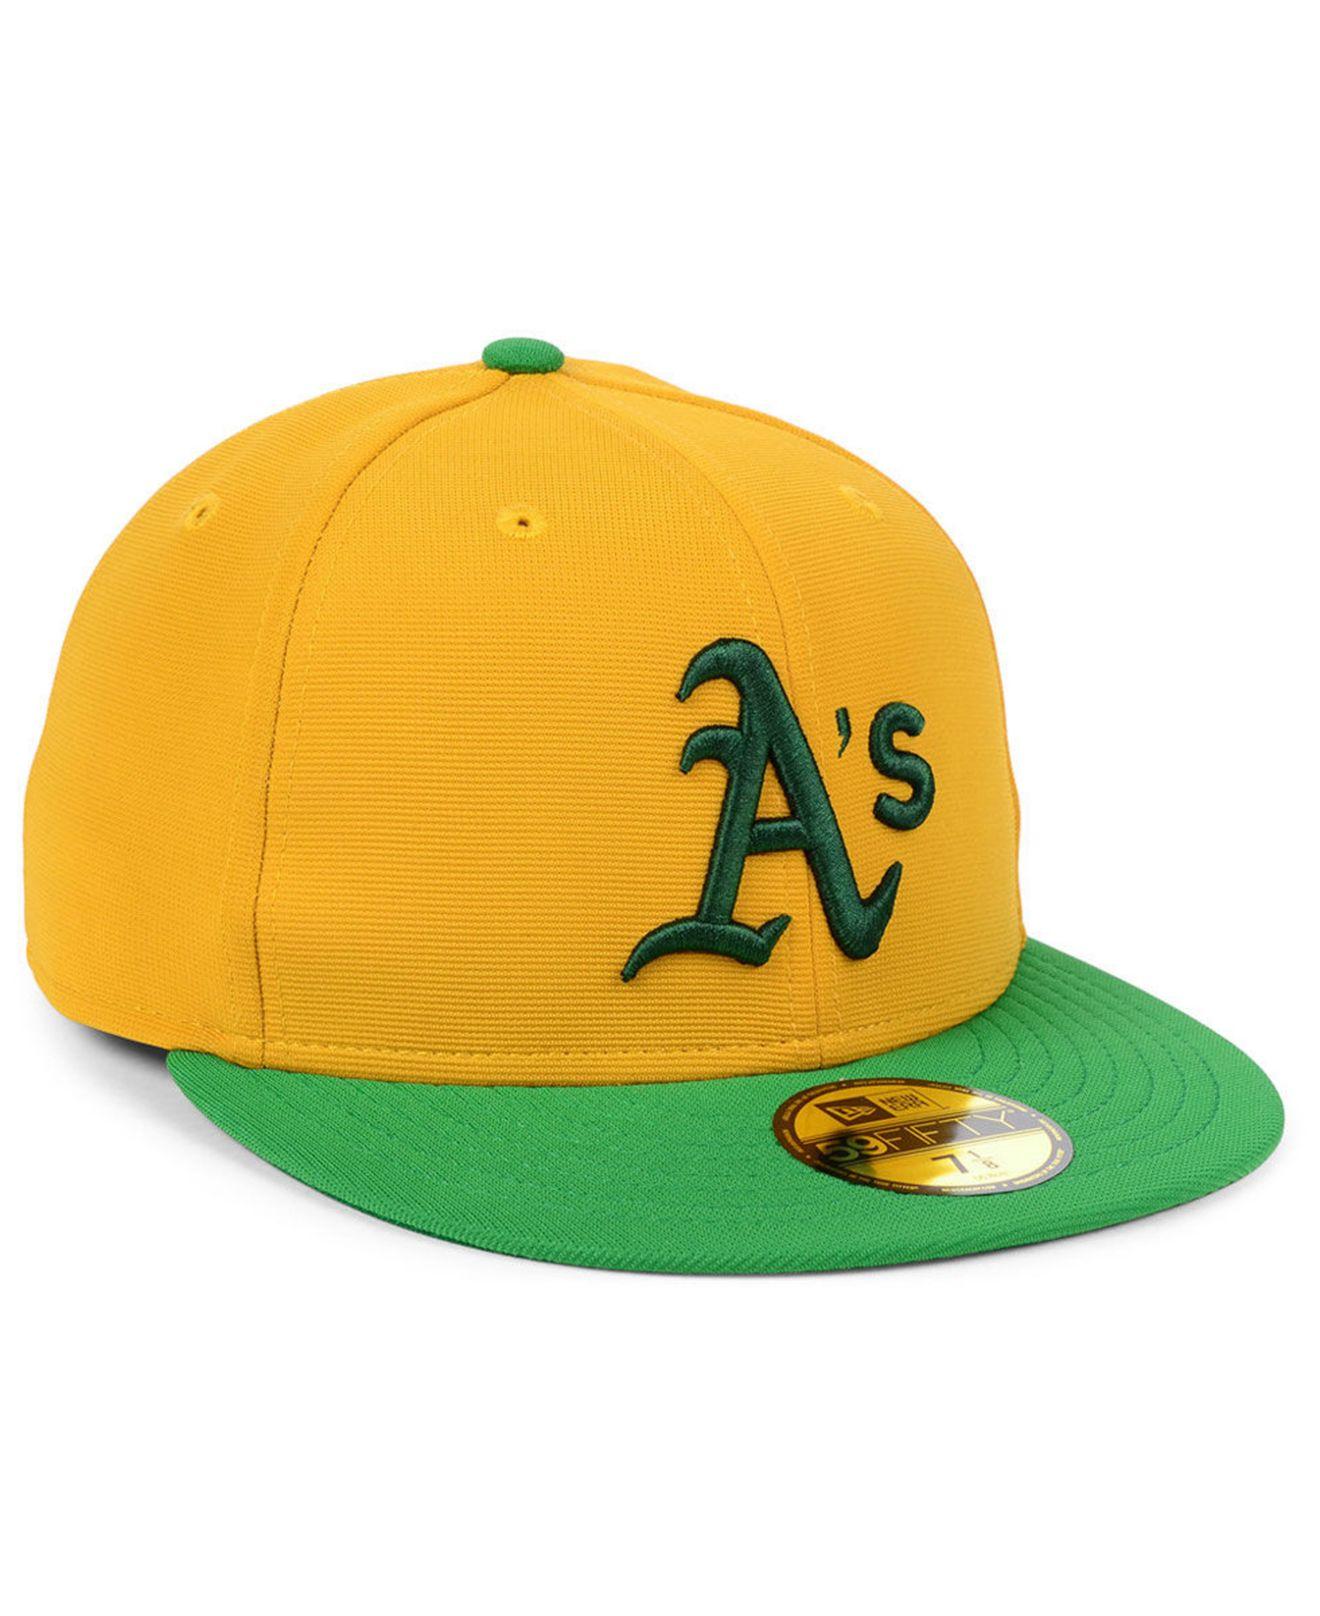 KTZ Oakland Athletics Cooperstown Flip 59fifty Fitted Cap in Yellow for Men